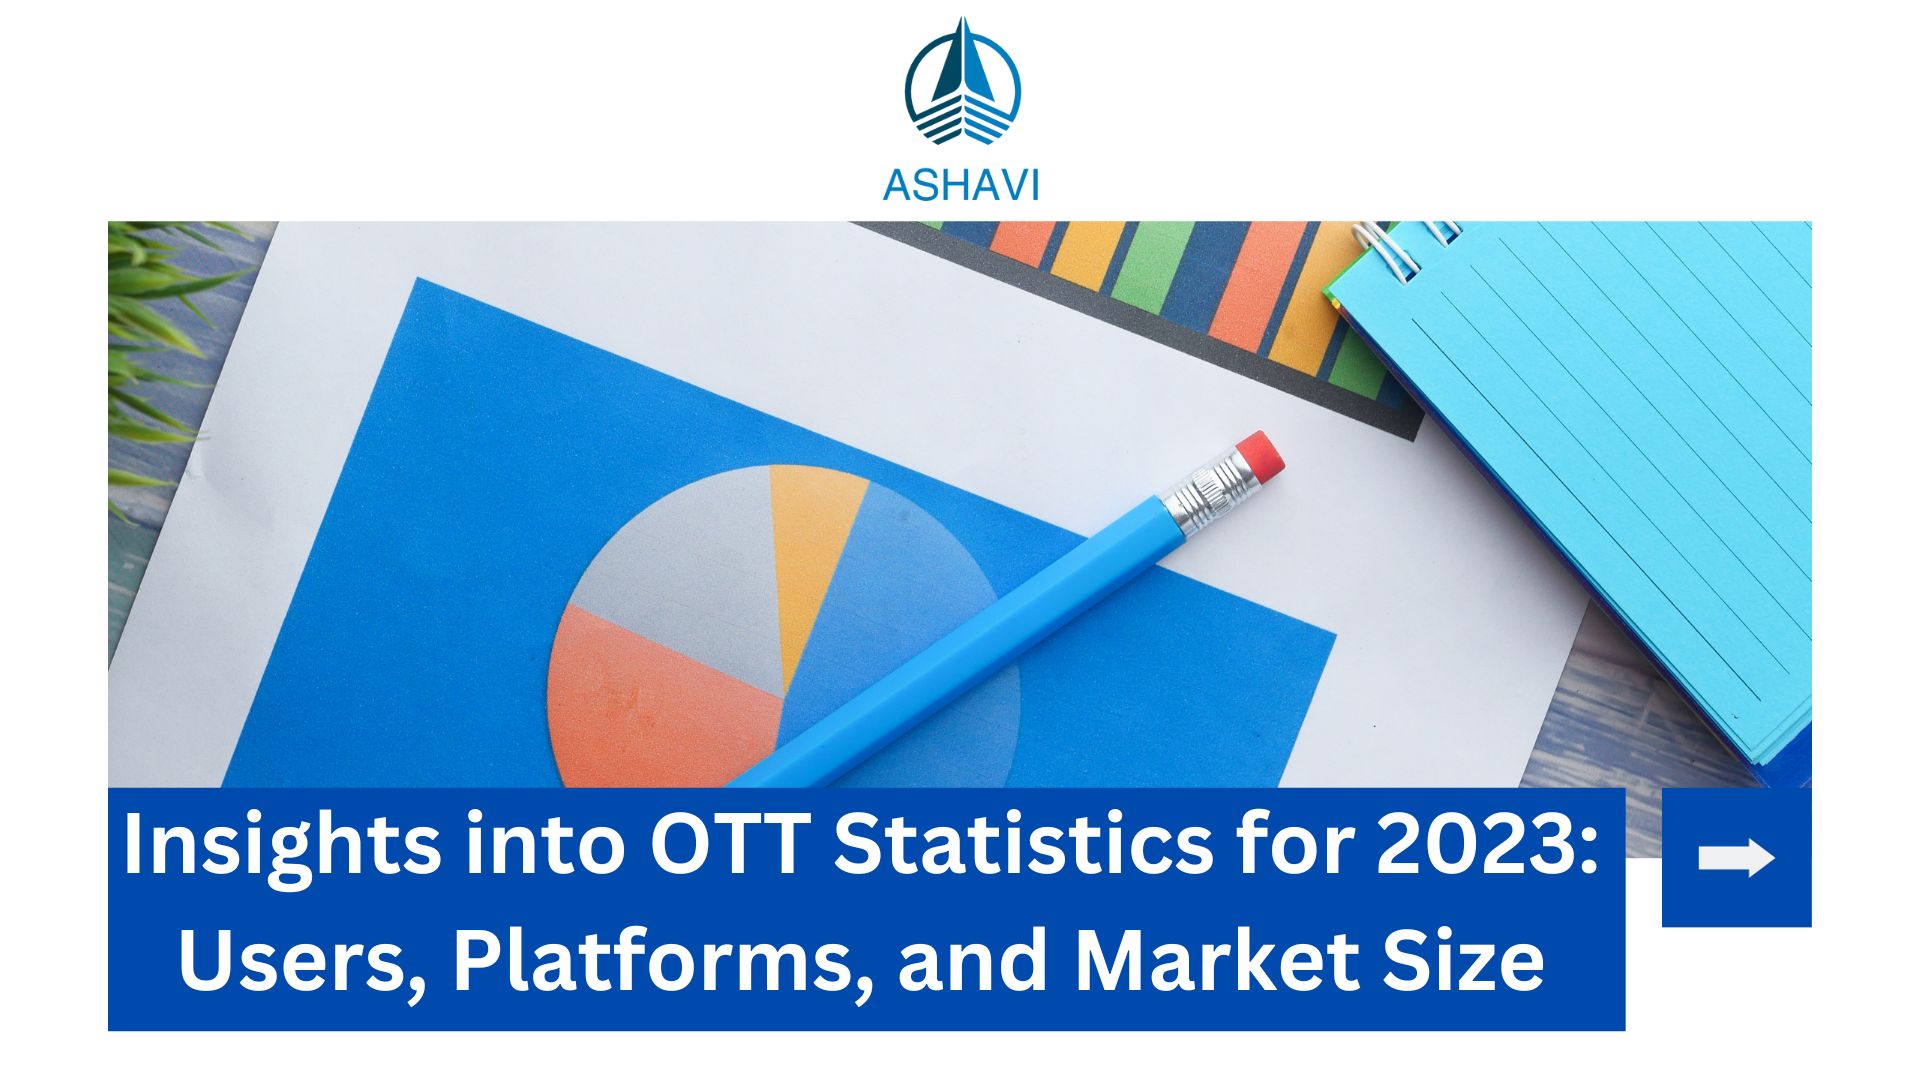 Insights into OTT Statistics for 2023: Users, Platforms, and Market Size